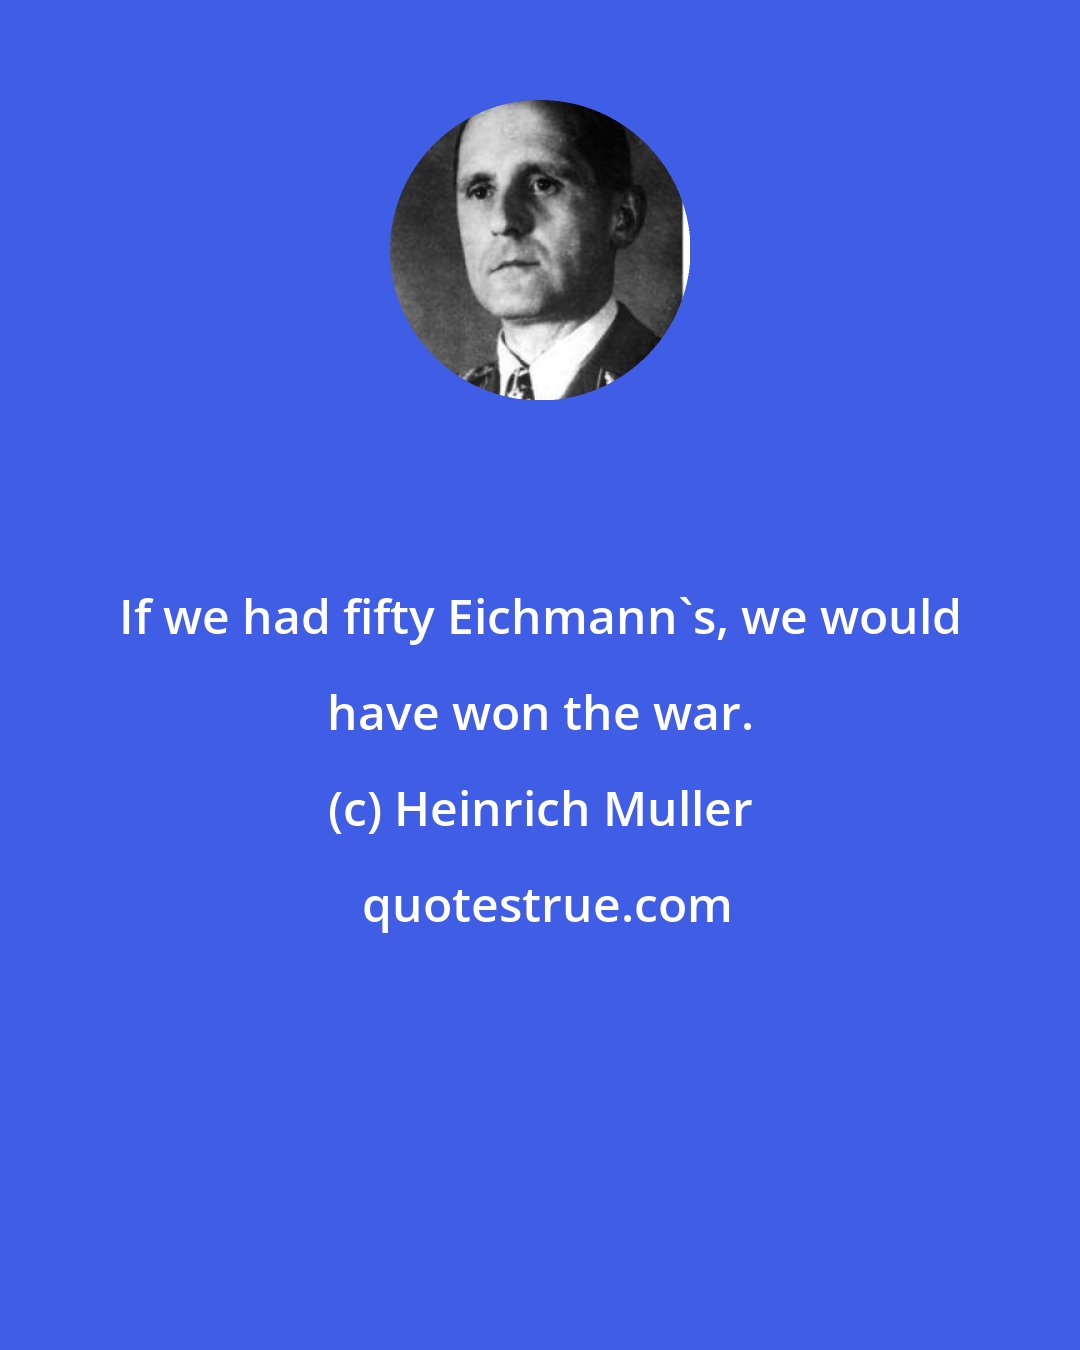 Heinrich Muller: If we had fifty Eichmann's, we would have won the war.